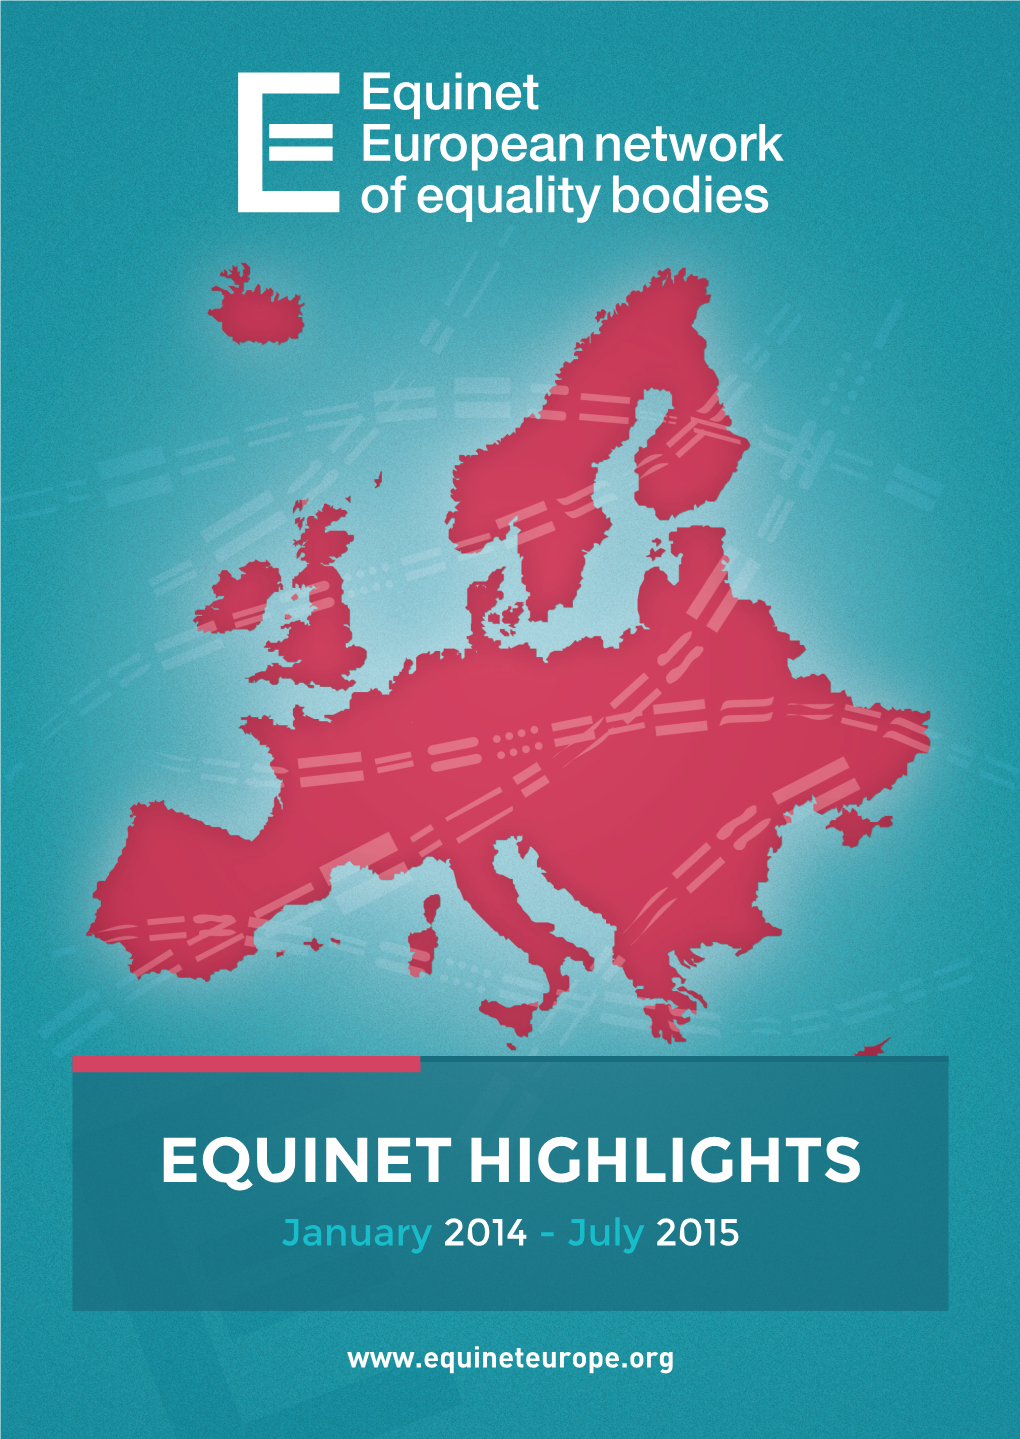 EQUINET HIGHLIGHTS January 2014 - July 2015